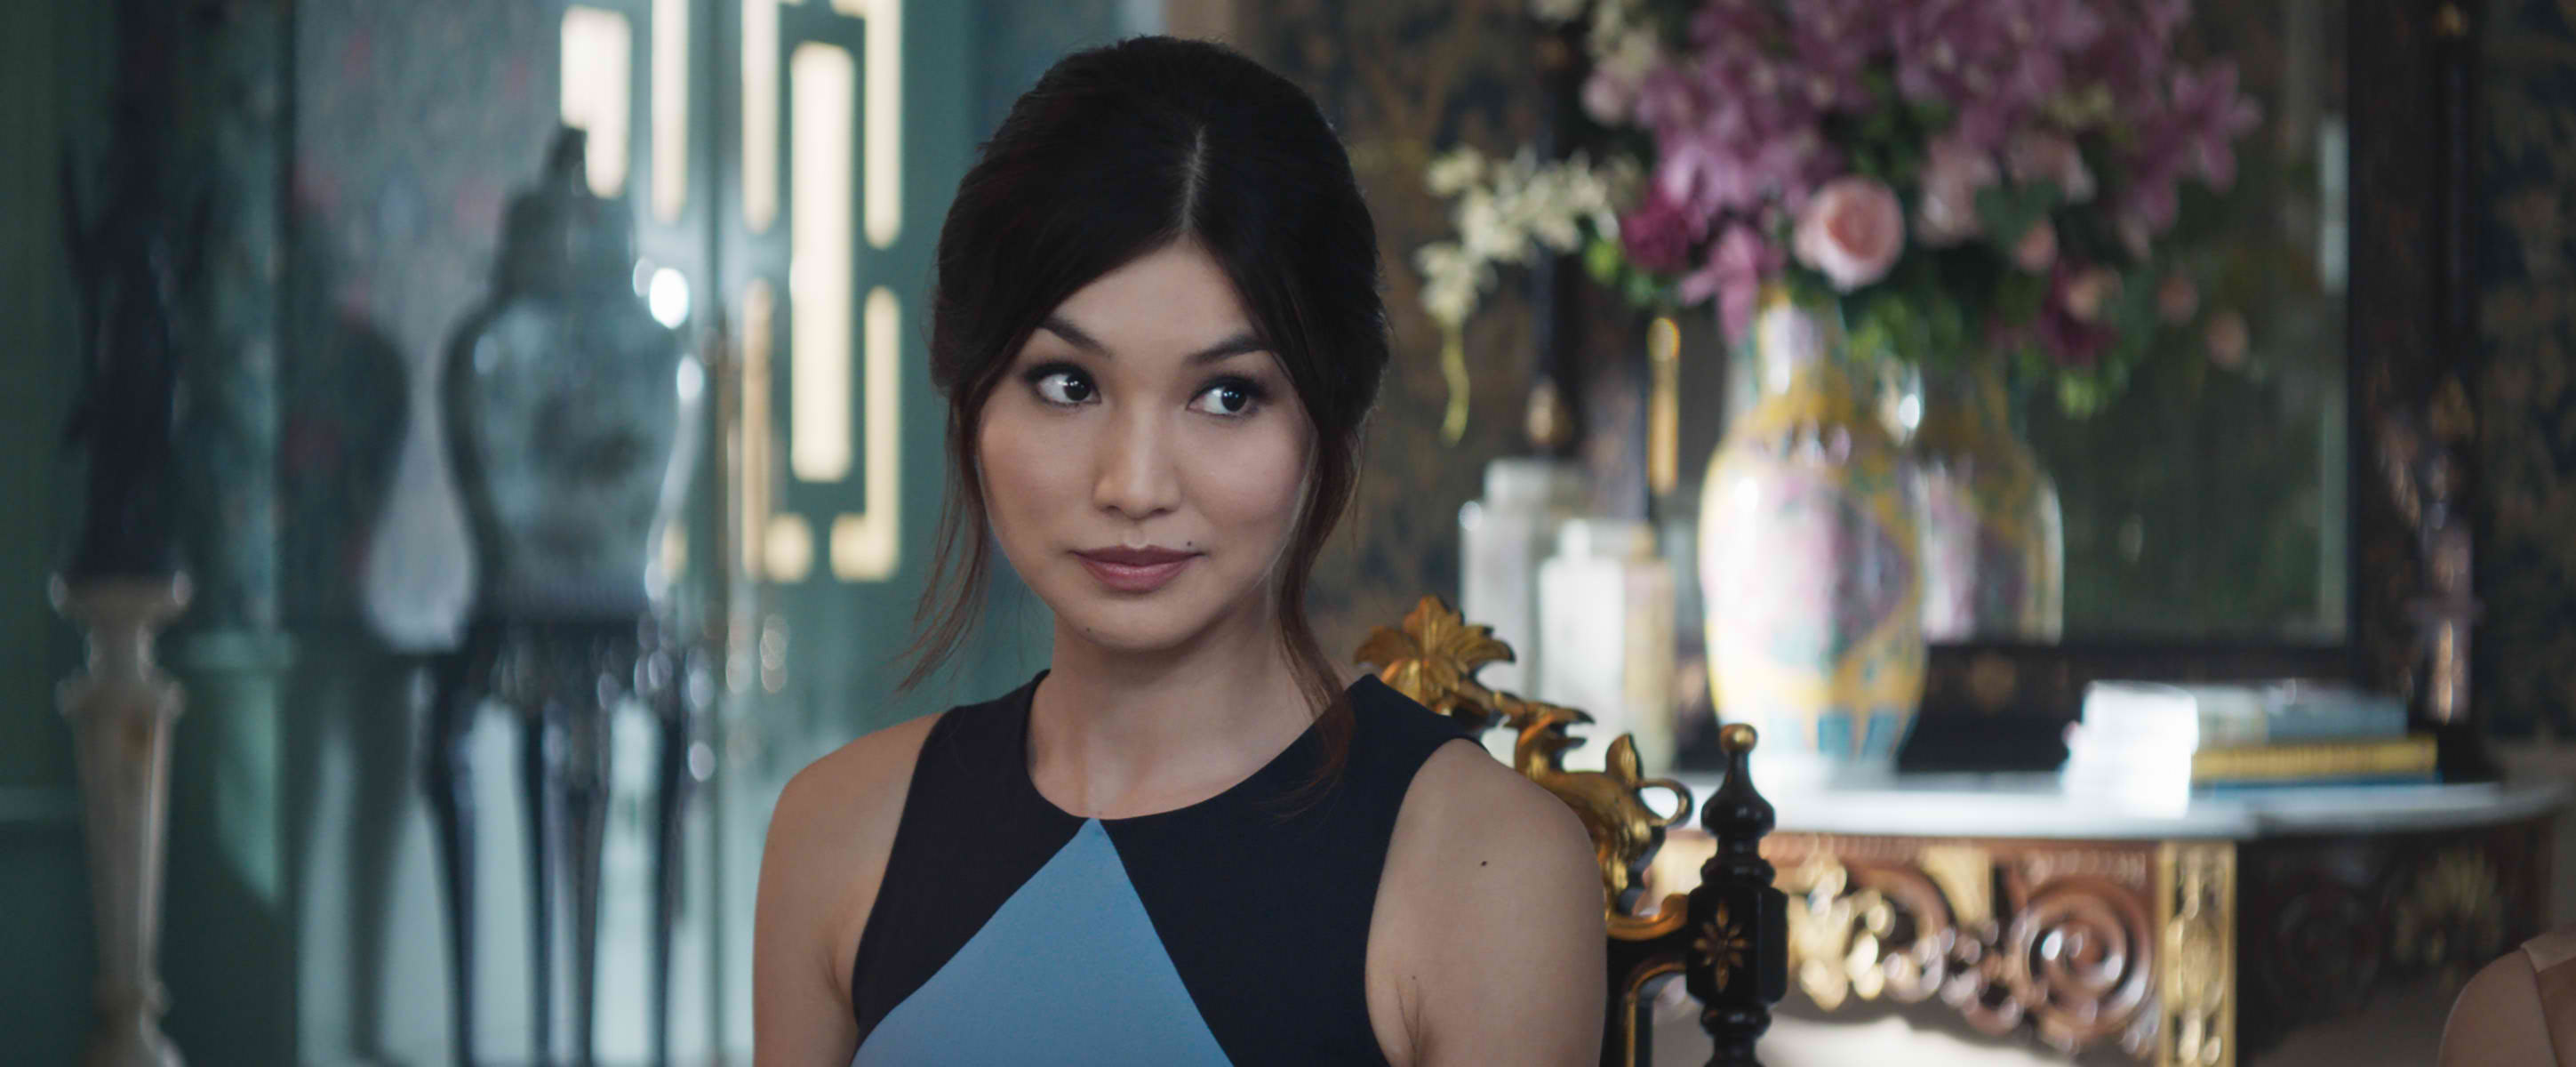 STYLE ICON. Astrid Leong (Gemma Chan) is the woman everyone wants to be. Image courtesy of Warner Bros. Entertainment Inc. and RatPac-Dune Entertainment LLC 